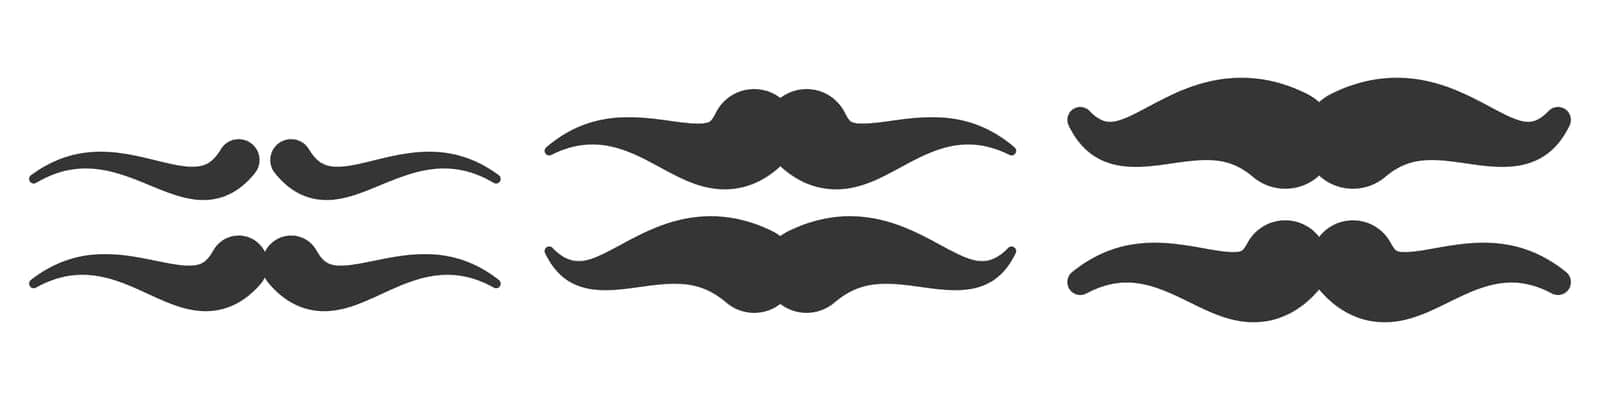 Set of vector Mustache icons. by Chekman